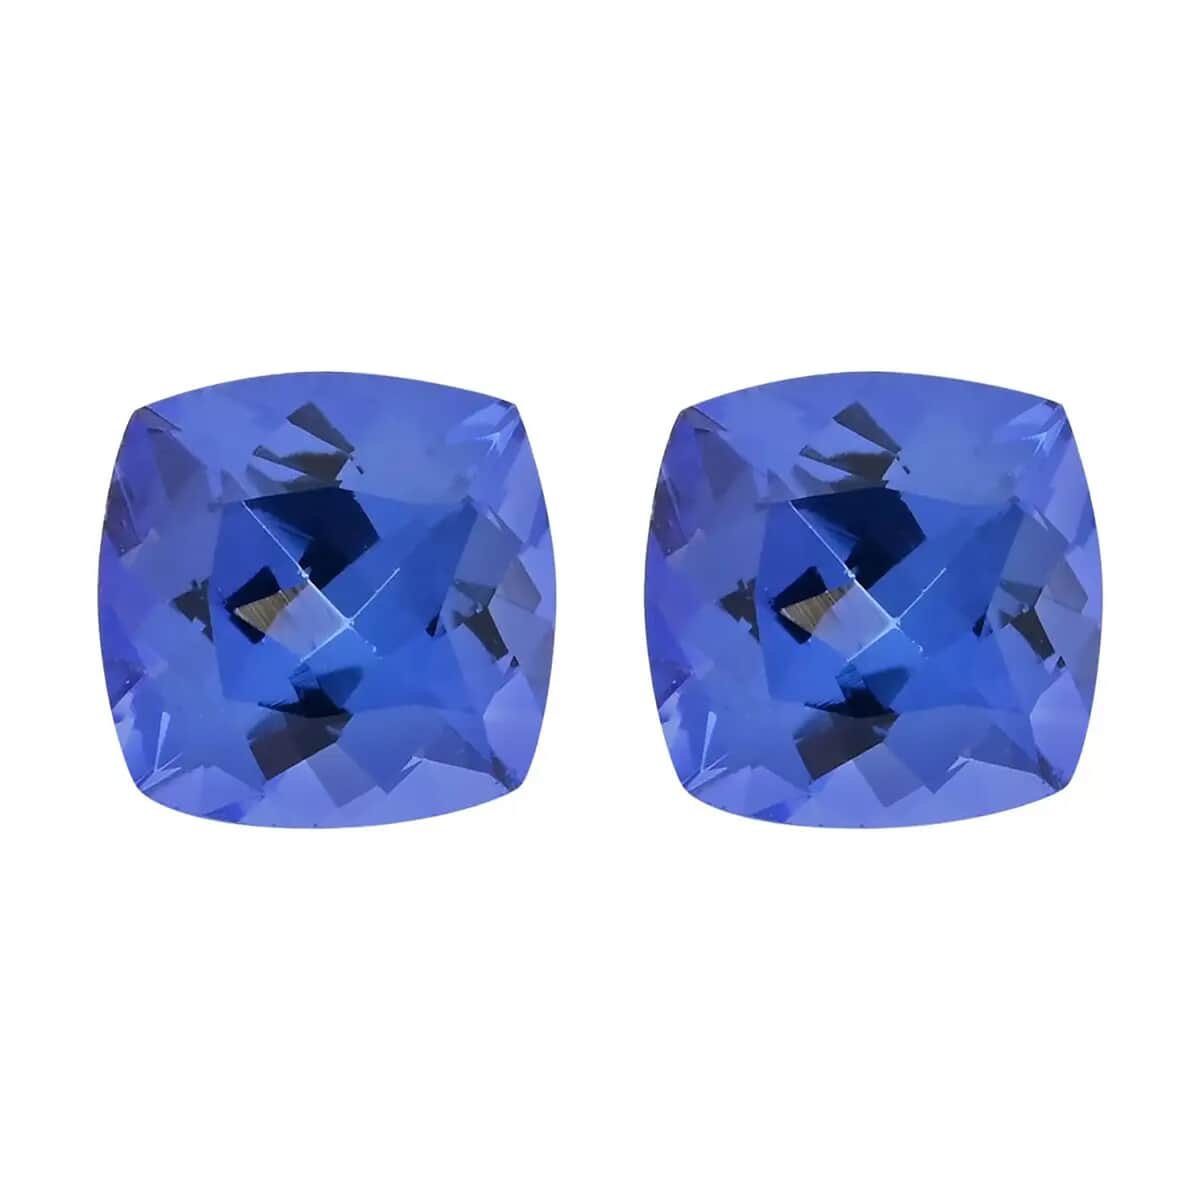 Certified & Appraised AAAA Tanzanite Set of 2, Cushion Shaped Loose Tanzanite Set For Earrings Ring Necklace Making, Loose Gemstone Set For Jewelry (Cush 6 mm) 2.00 ctw image number 0